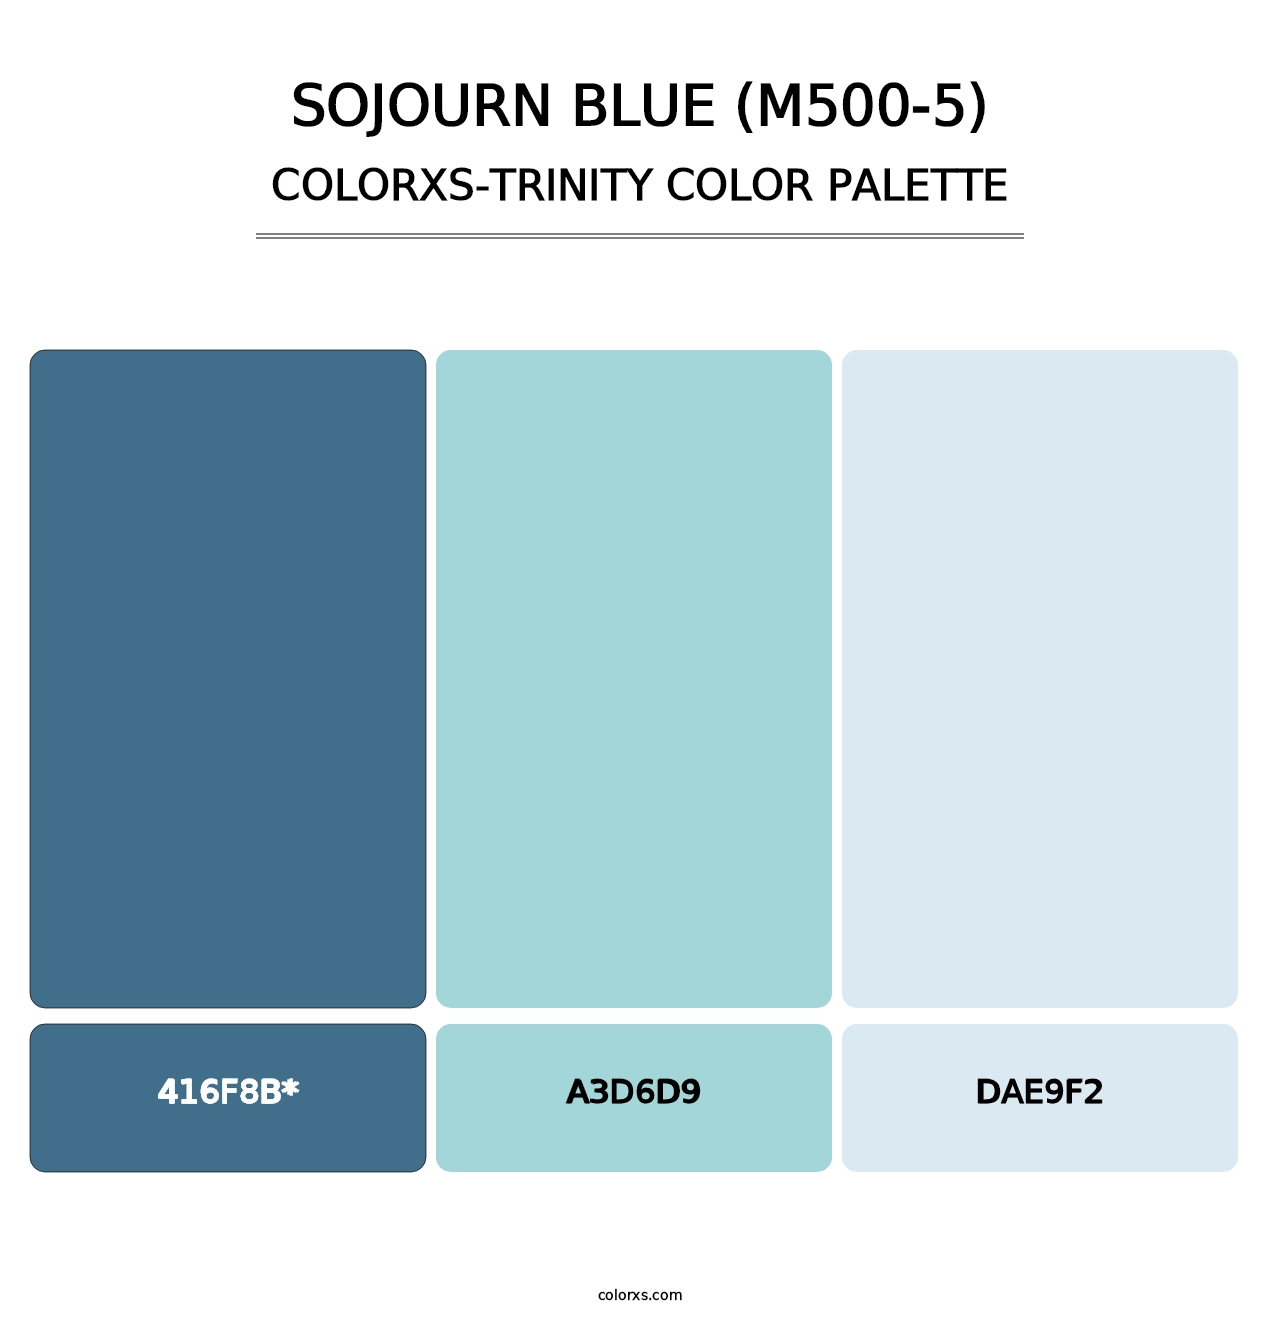 Sojourn Blue (M500-5) - Colorxs Trinity Palette